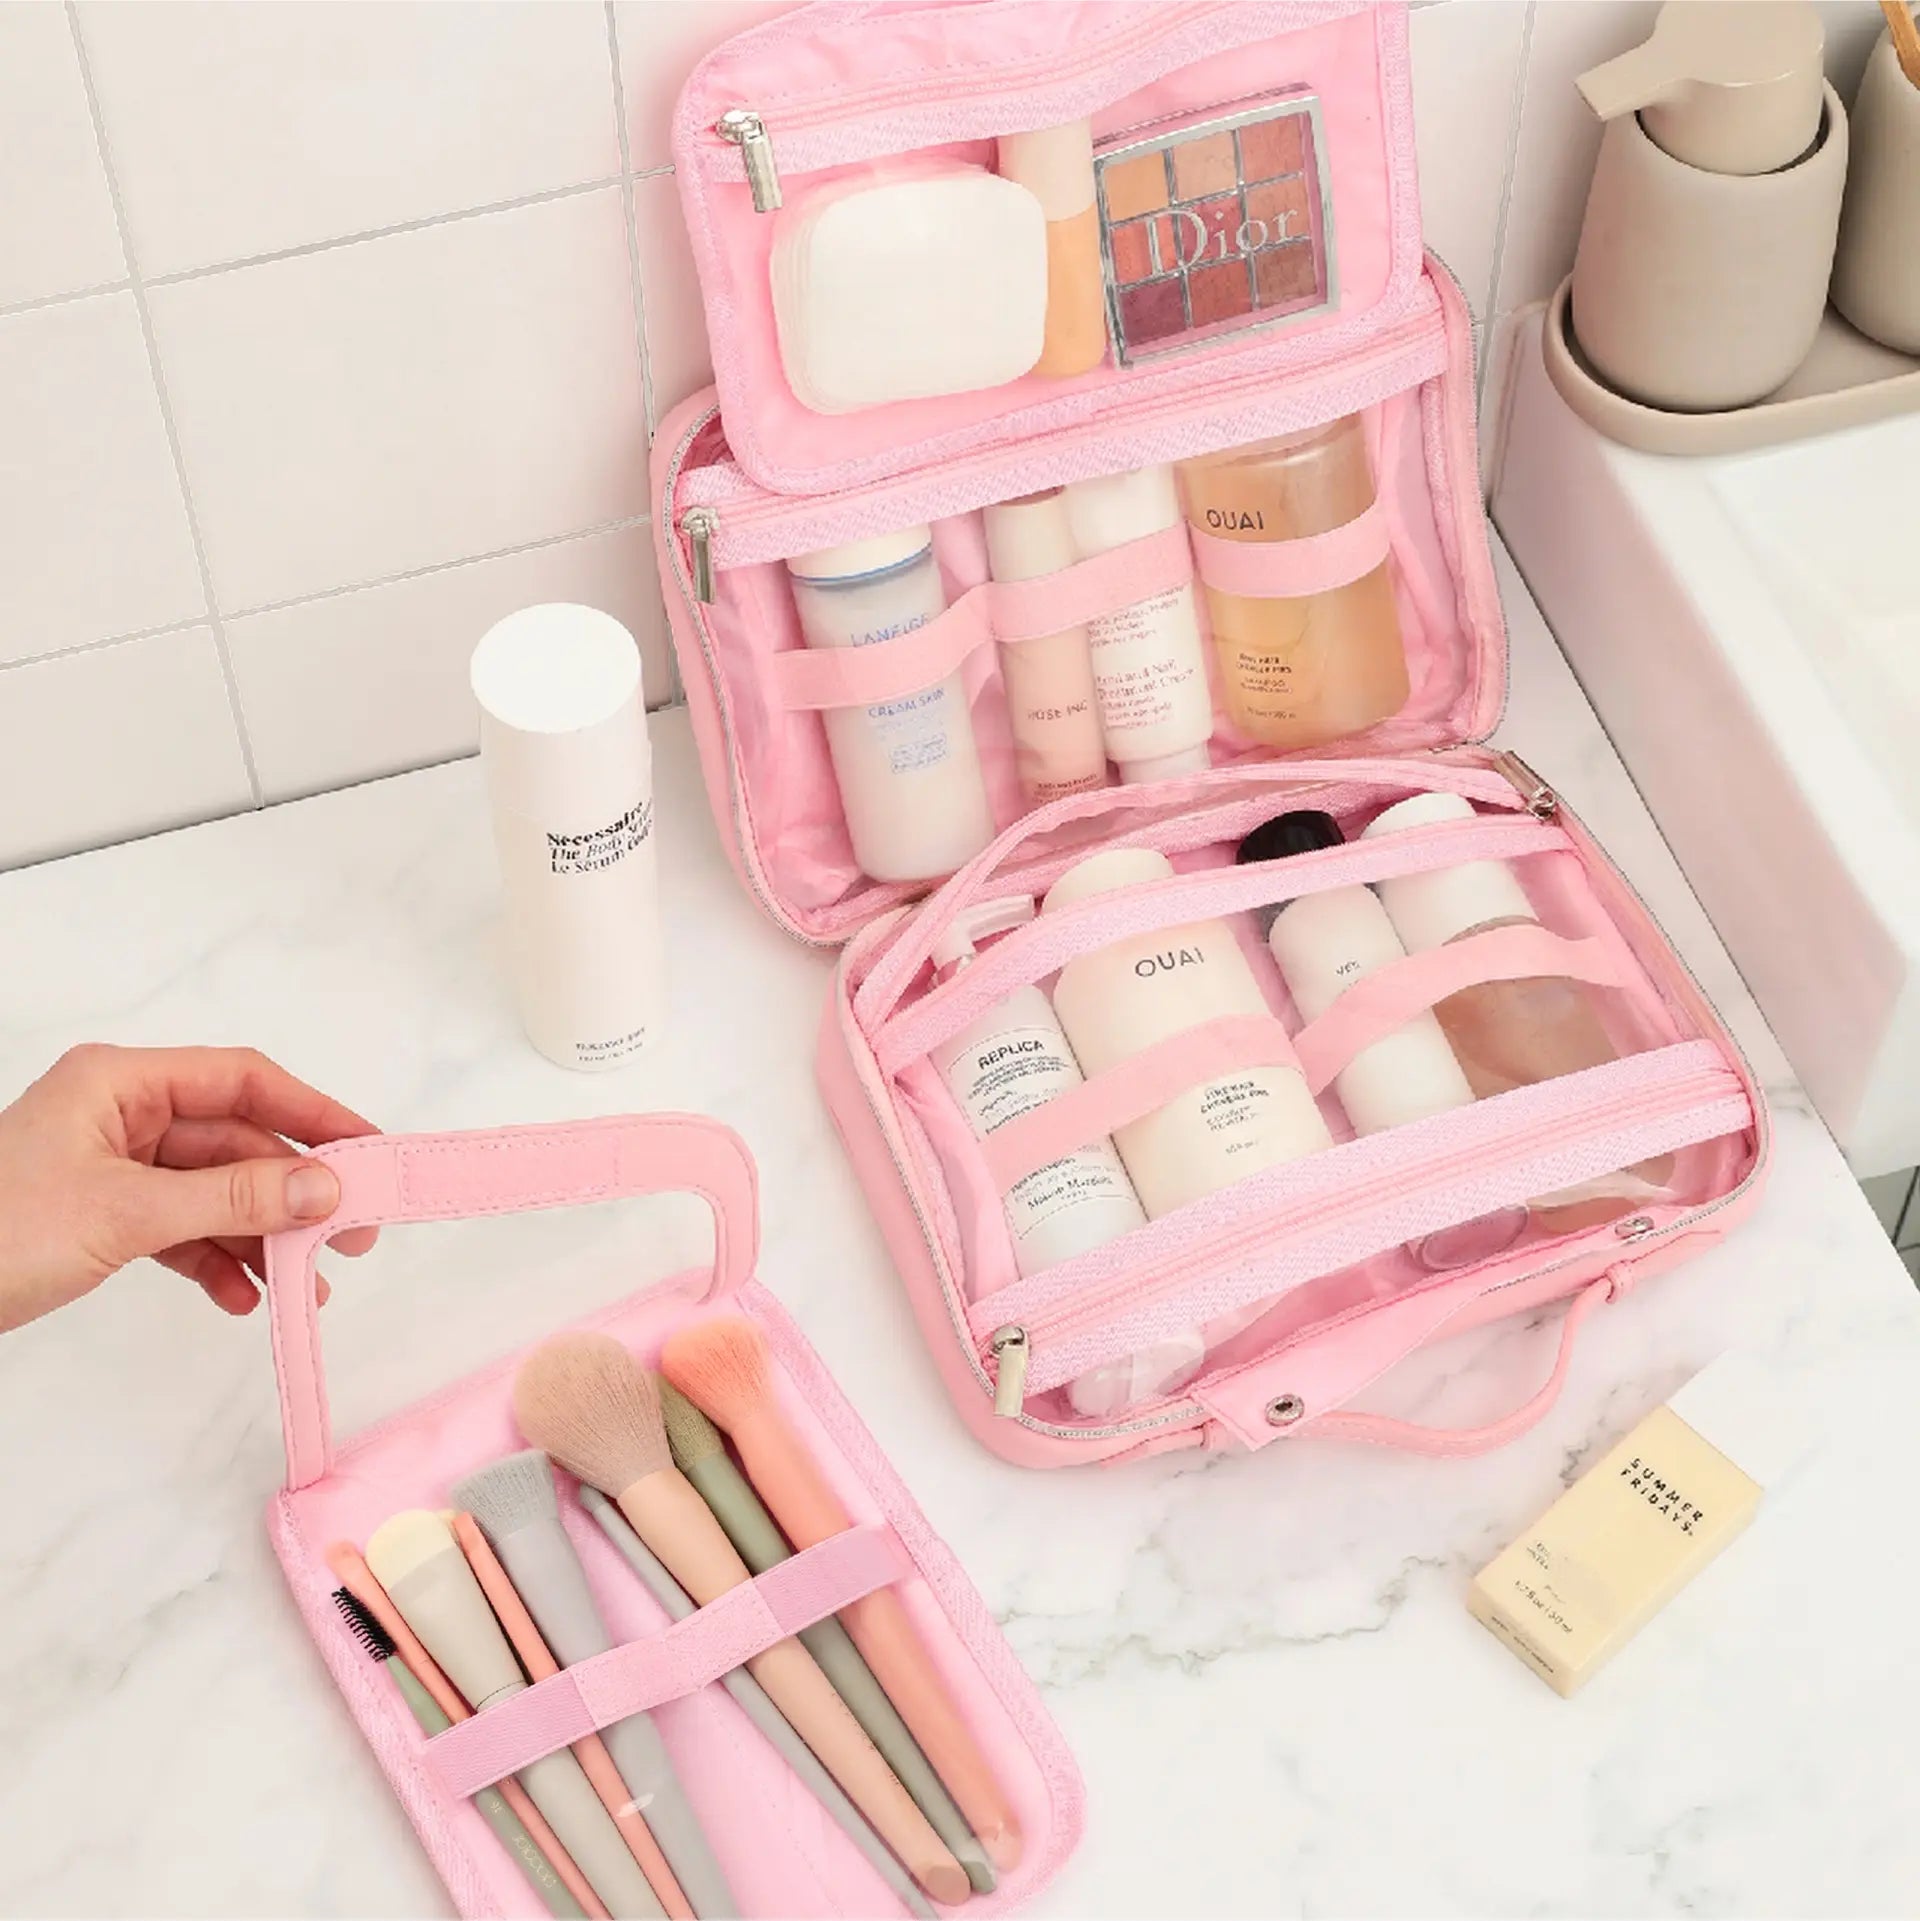 LARGE TOILETRY BAG